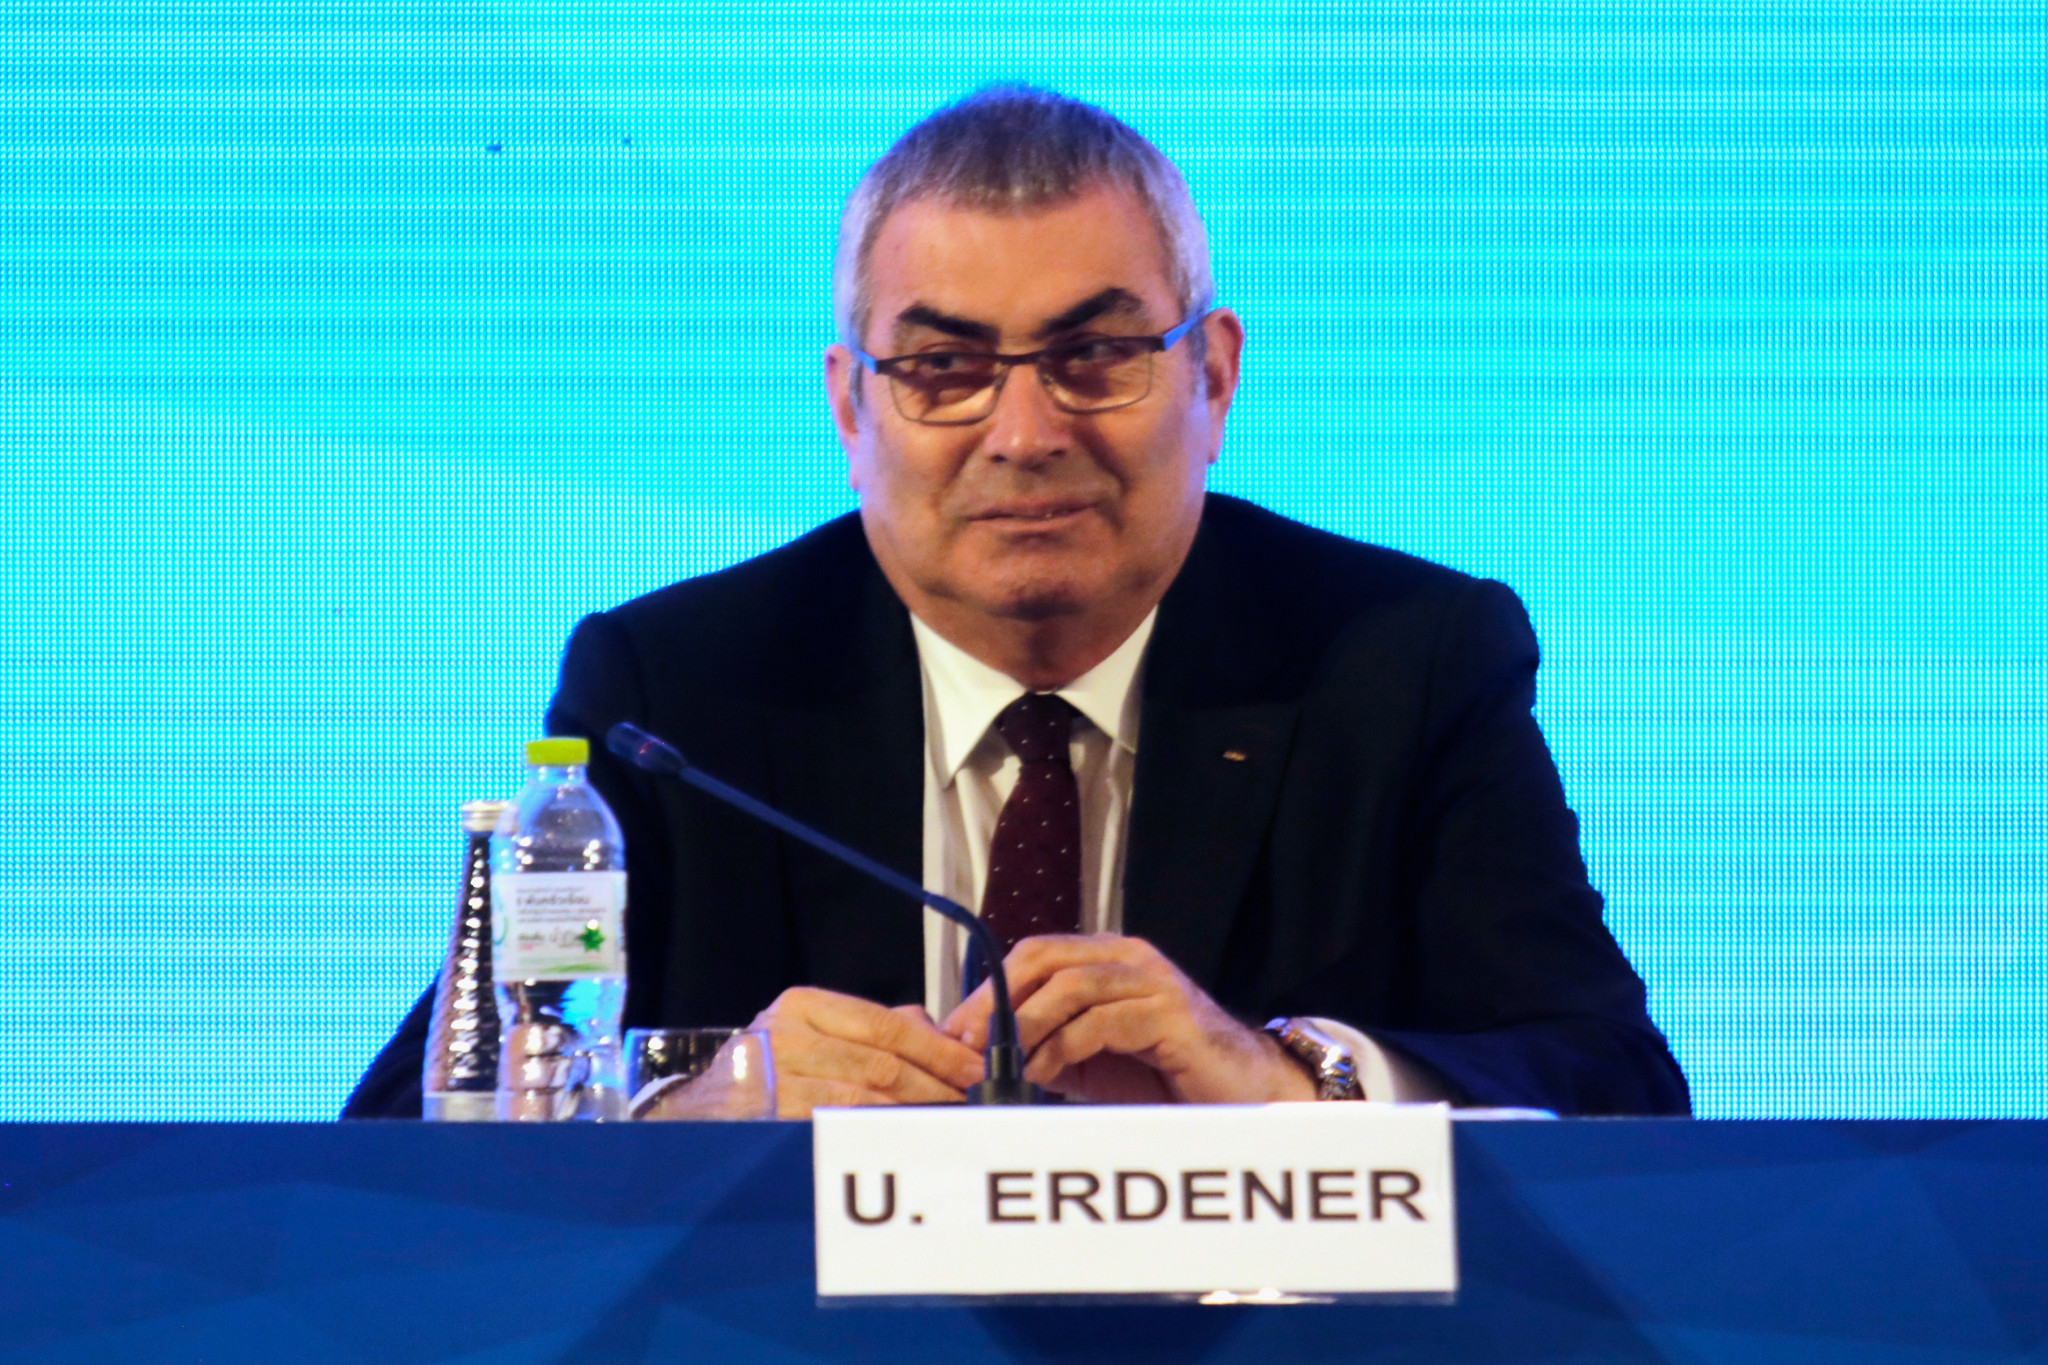 Erdener announced as chair as IOC reveals make-up of 2022 Youth Olympic Games Evaluation Commission 